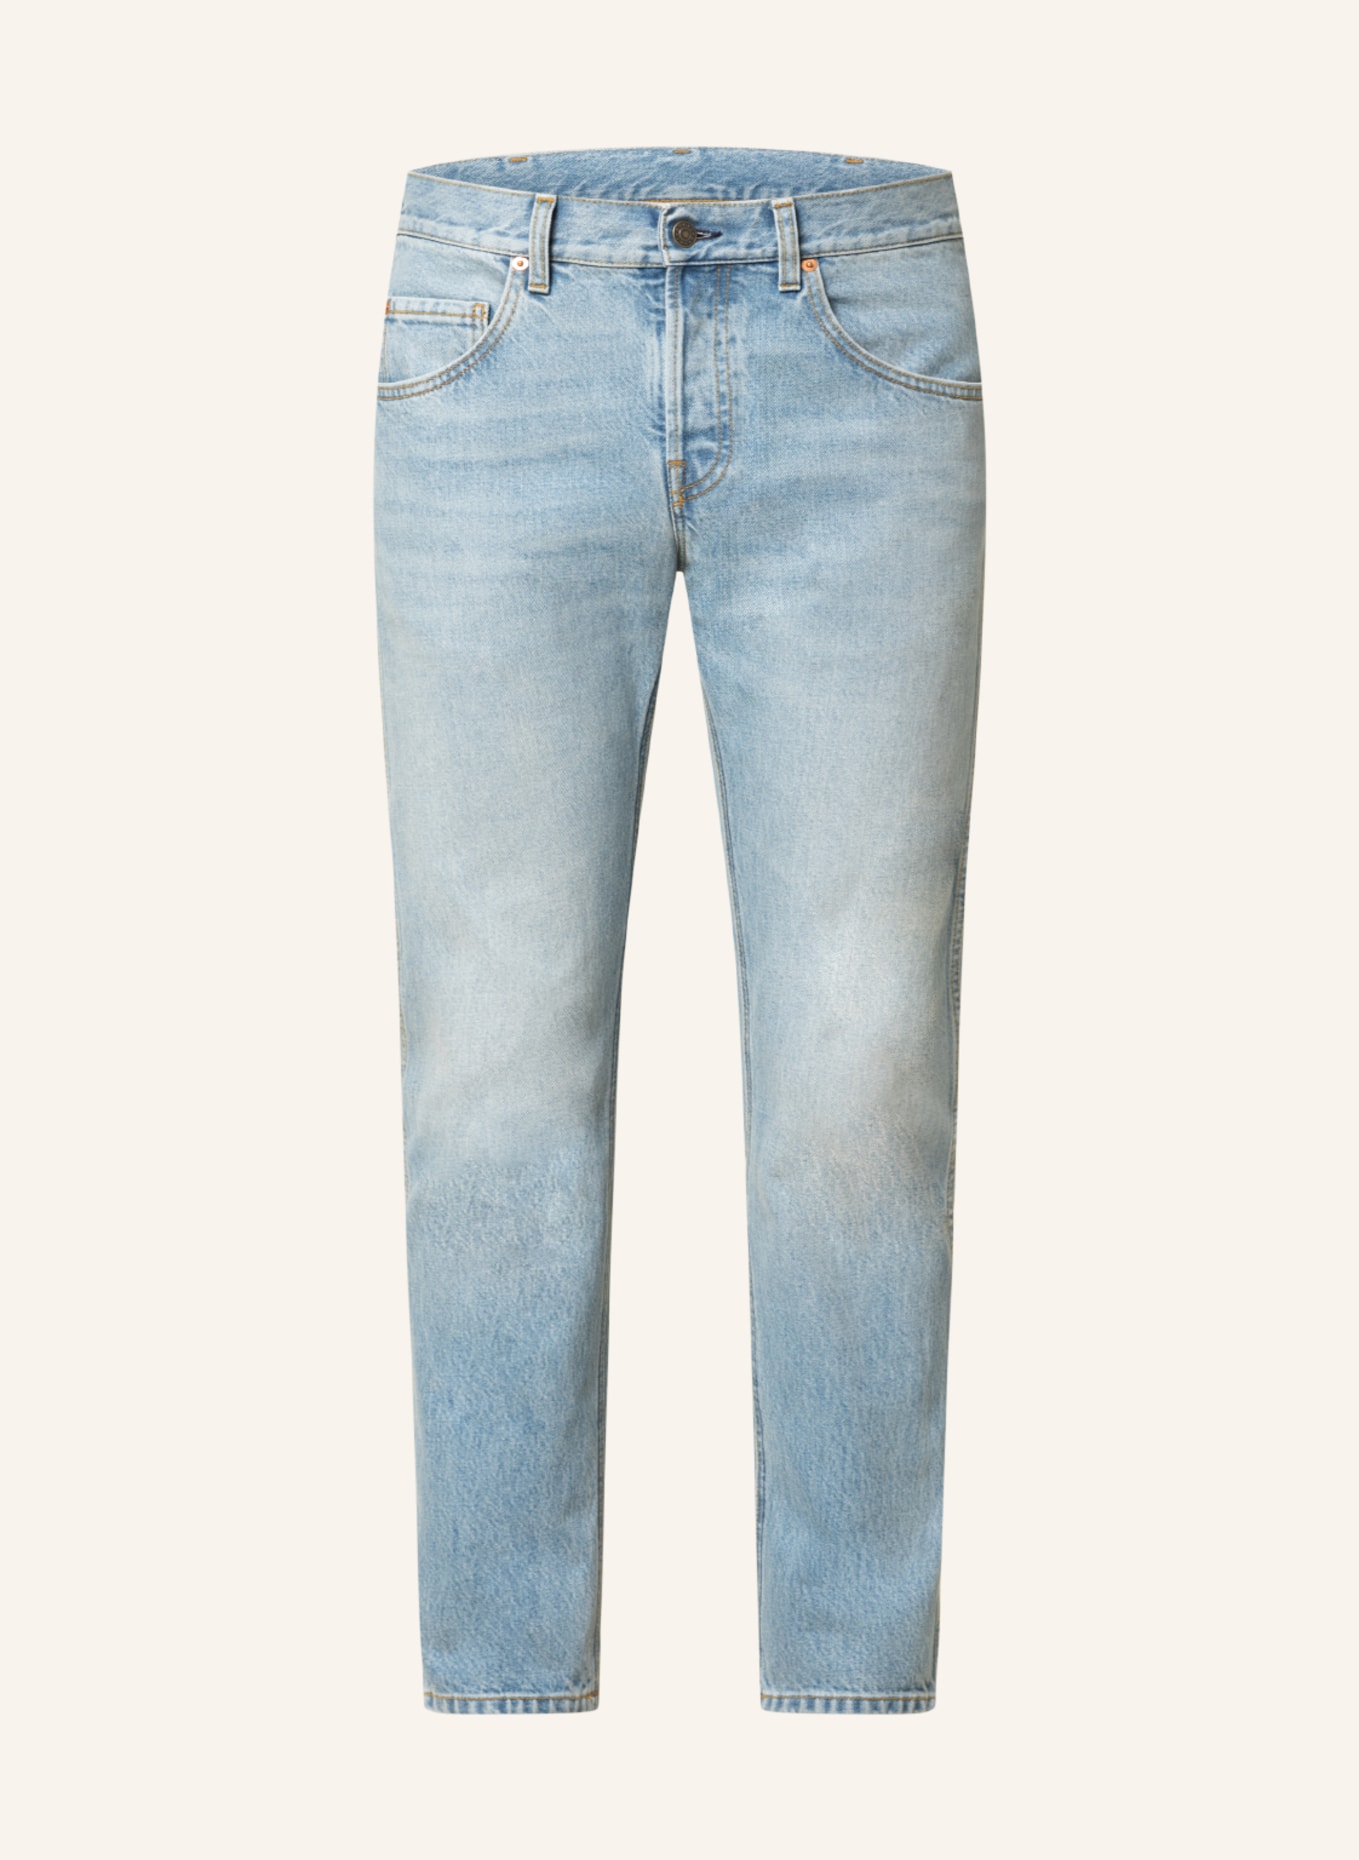 GUCCI Jeans Tapered Fit , Farbe: 4447 Blue/Mix(Bild null)